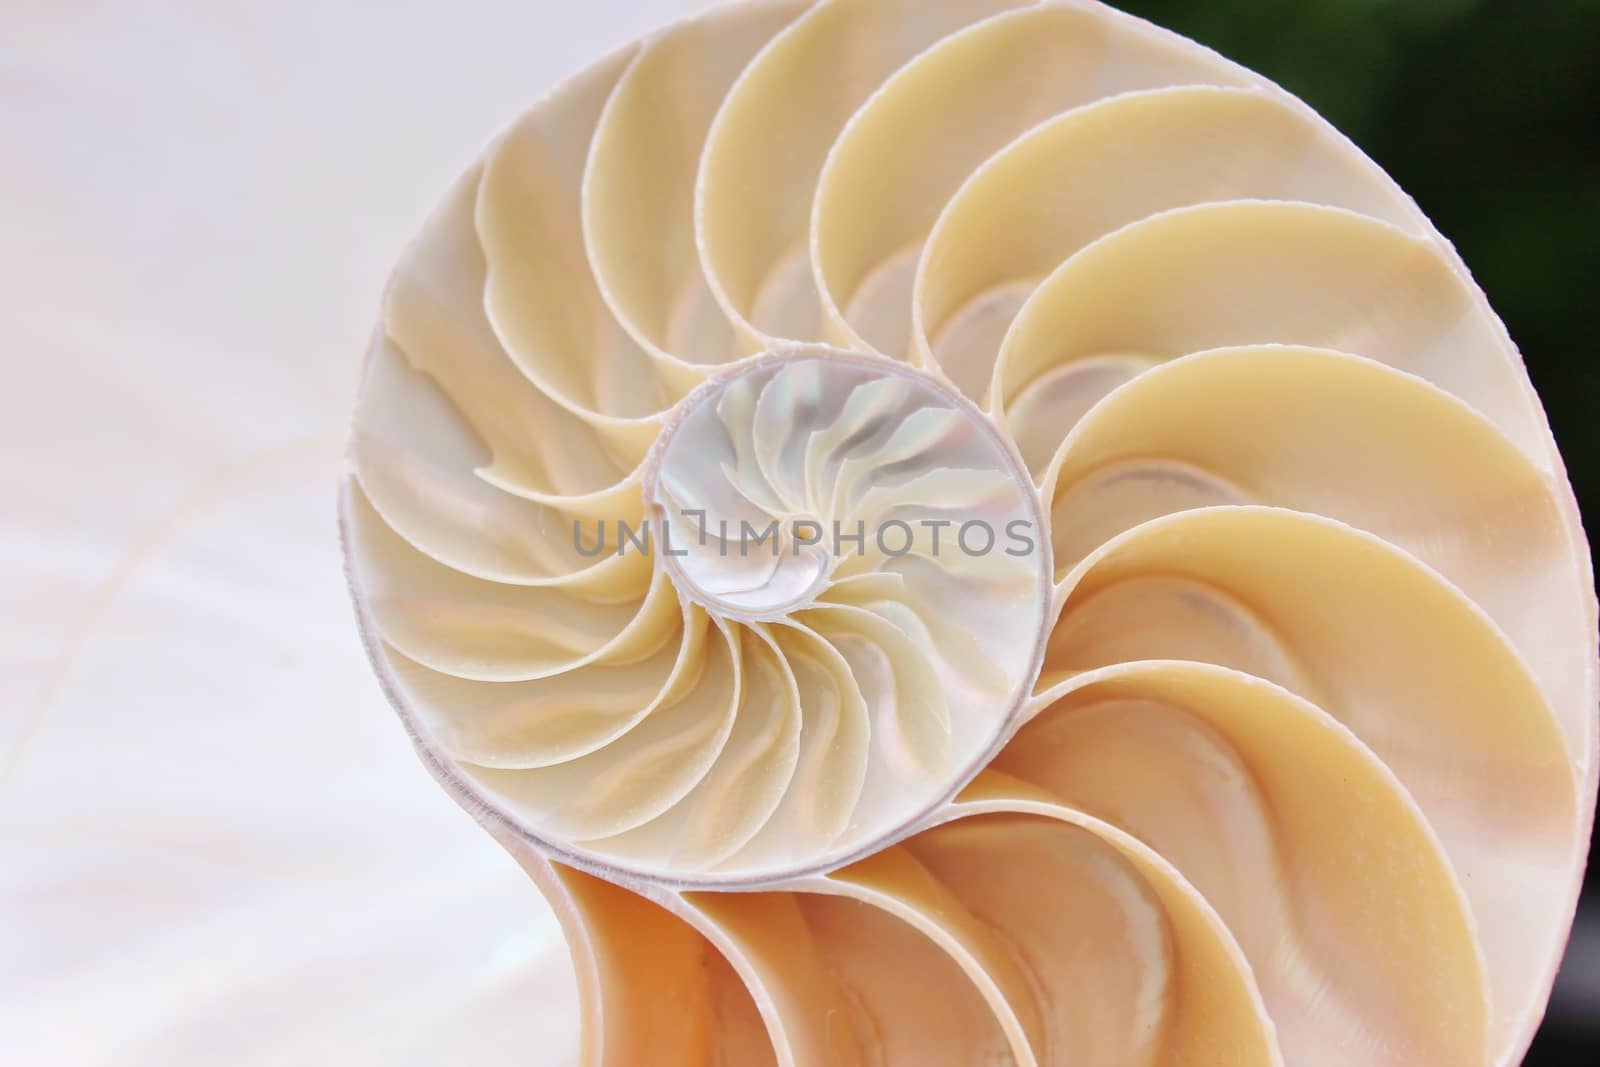 nautilus shell cross section spiral 